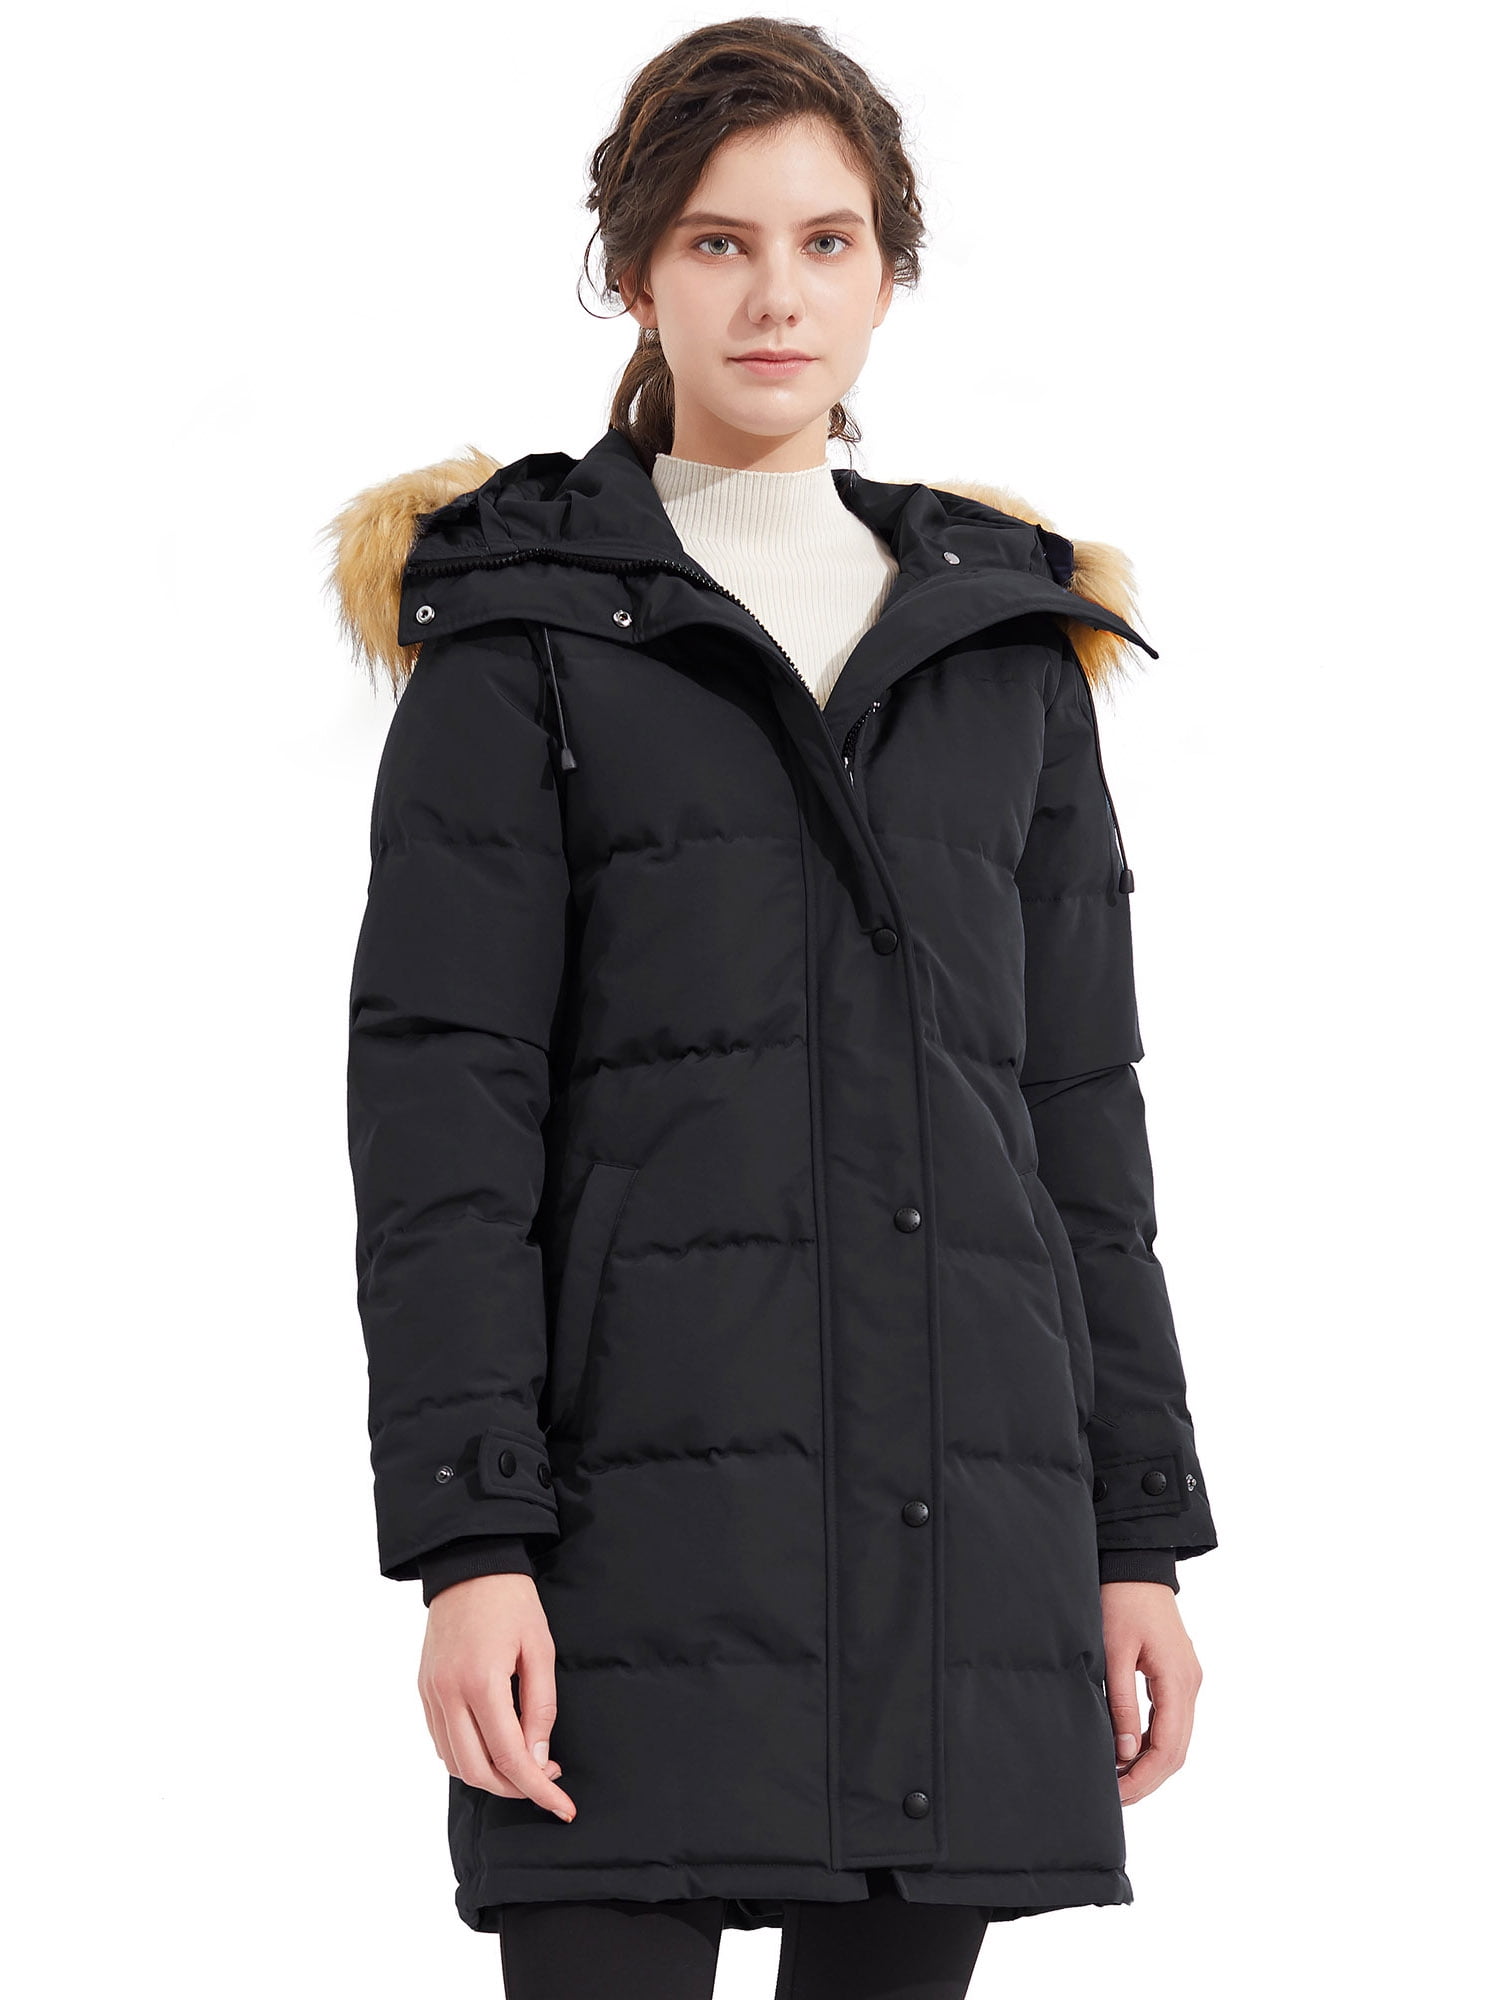 Orolay Women's Down Puffer Coat Winter Jacket with Adjustable Hood ...